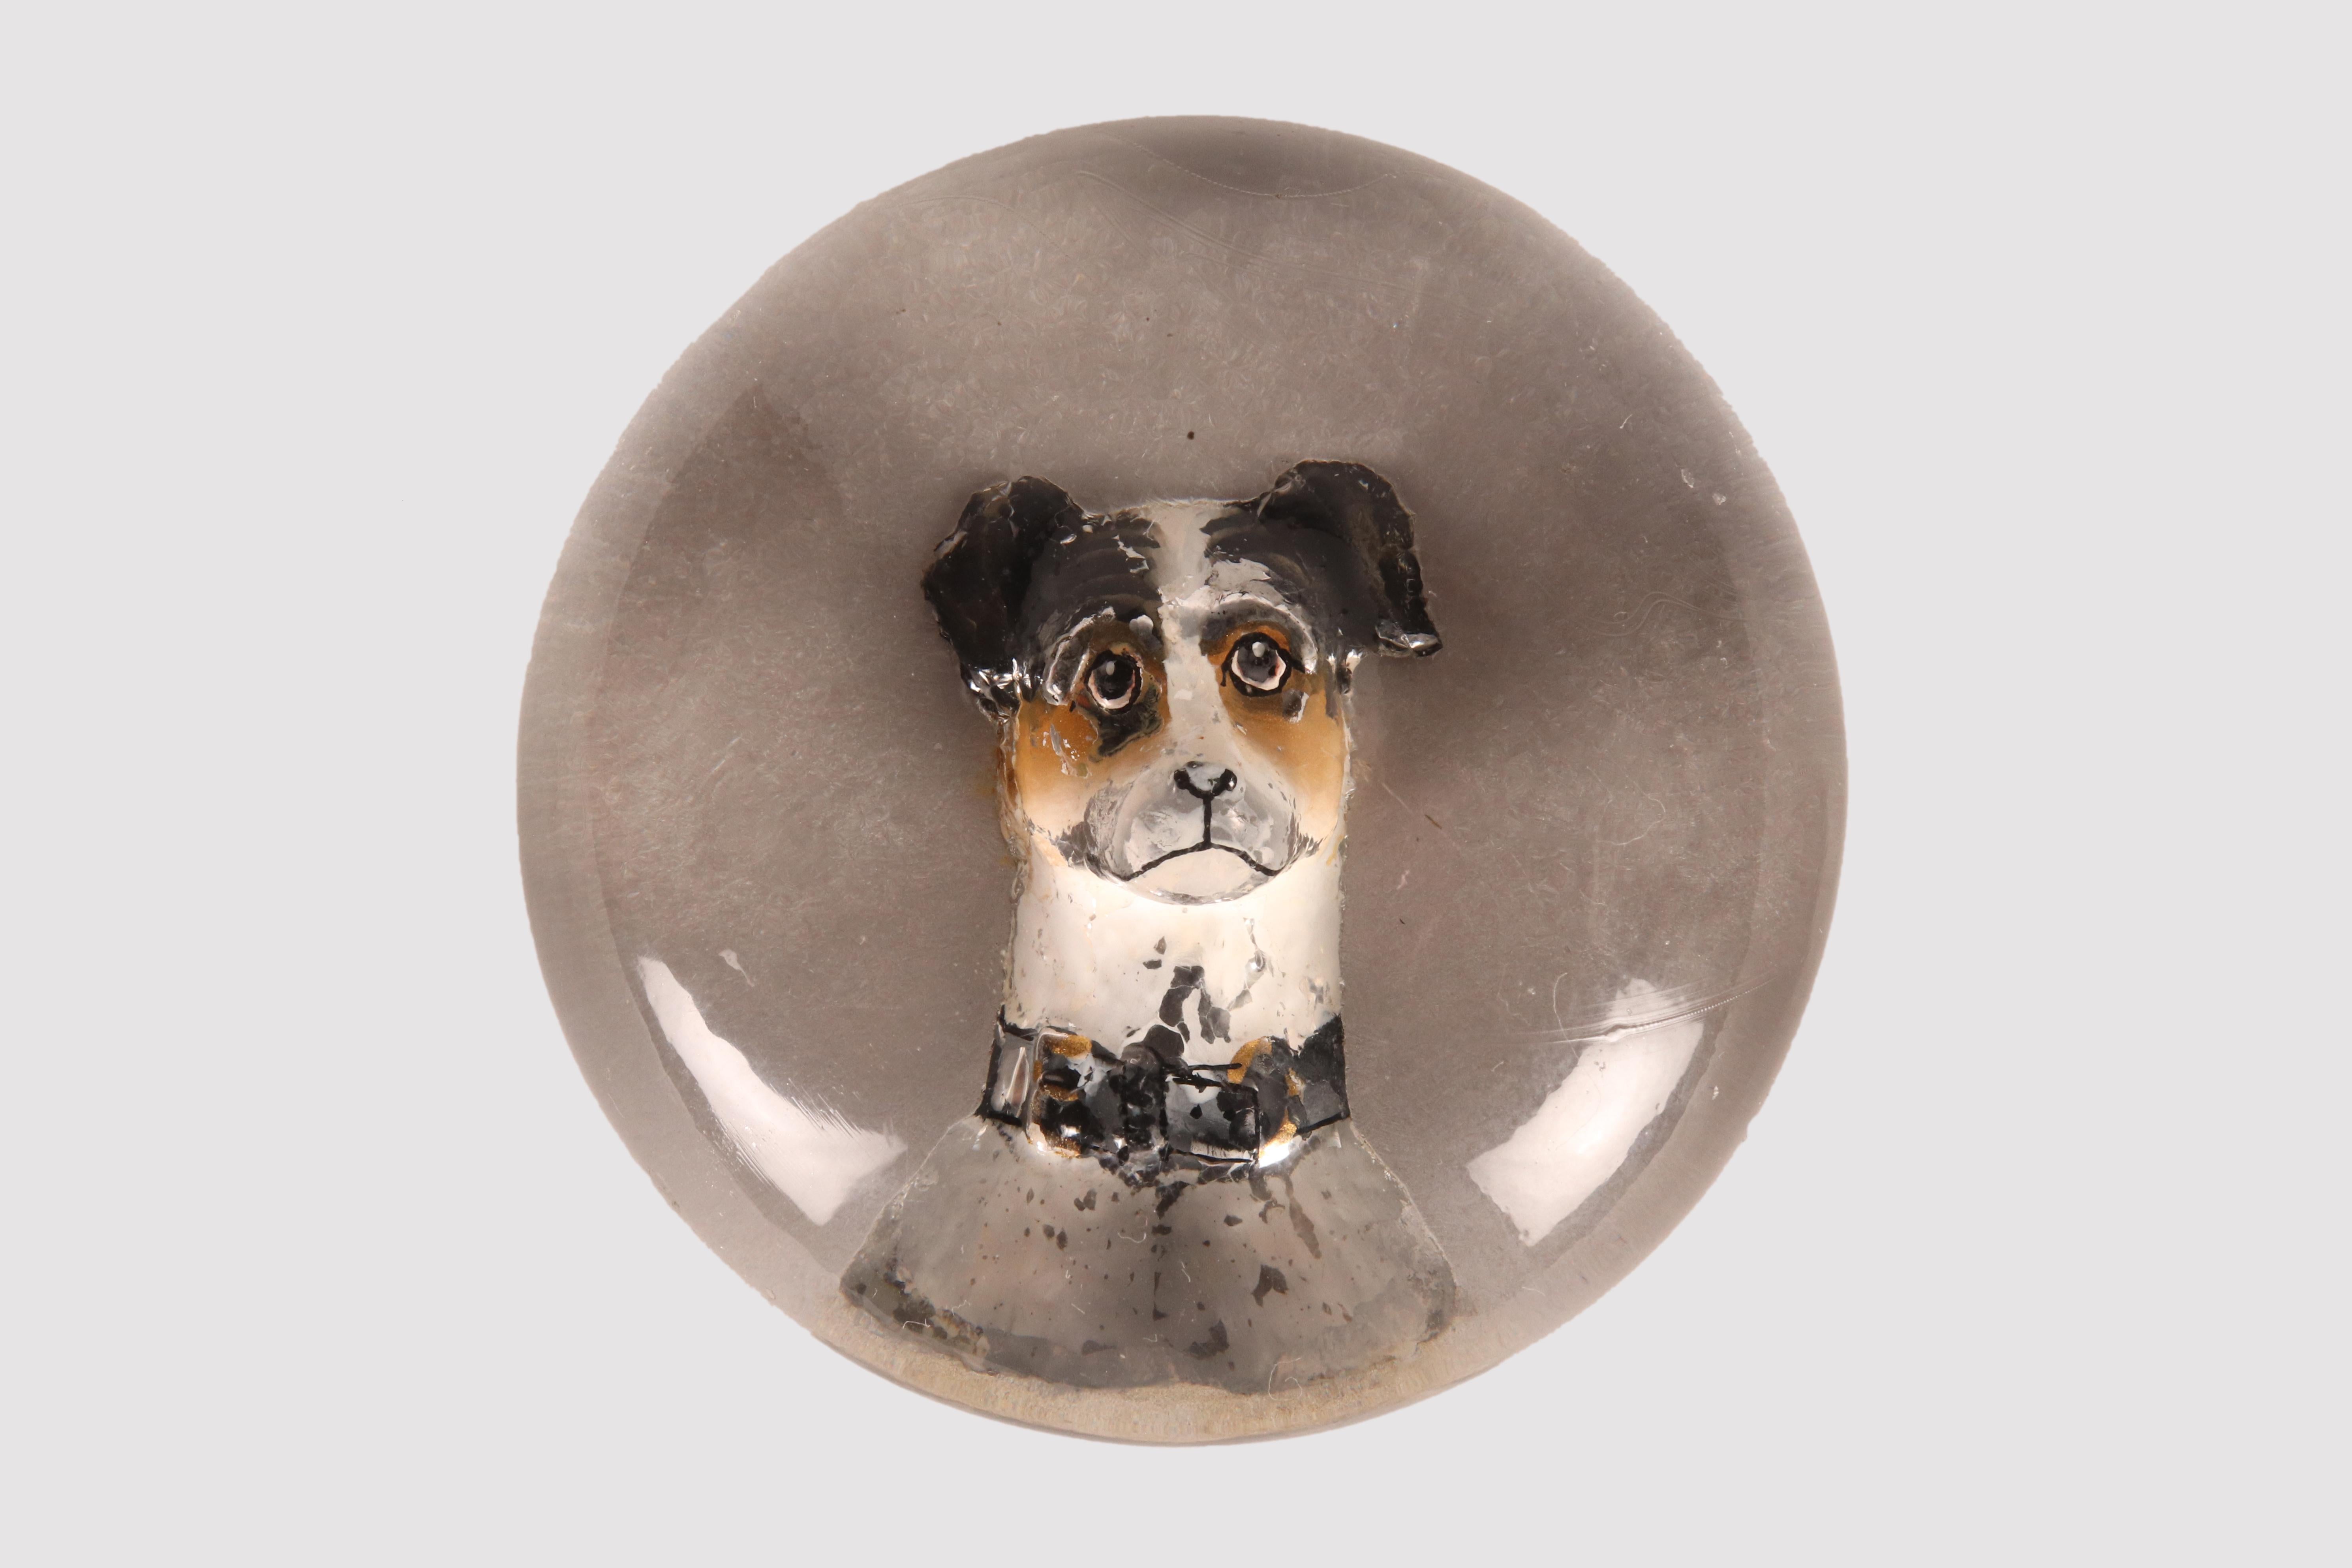 Antique English bubble glass paper weight or paper press, with intaglio of the head of a Jack Russel dog, carved and painted reverse, Essex crystal style links. (Essex crystal jewelry became popular during the Victorian era, using a reverse carving